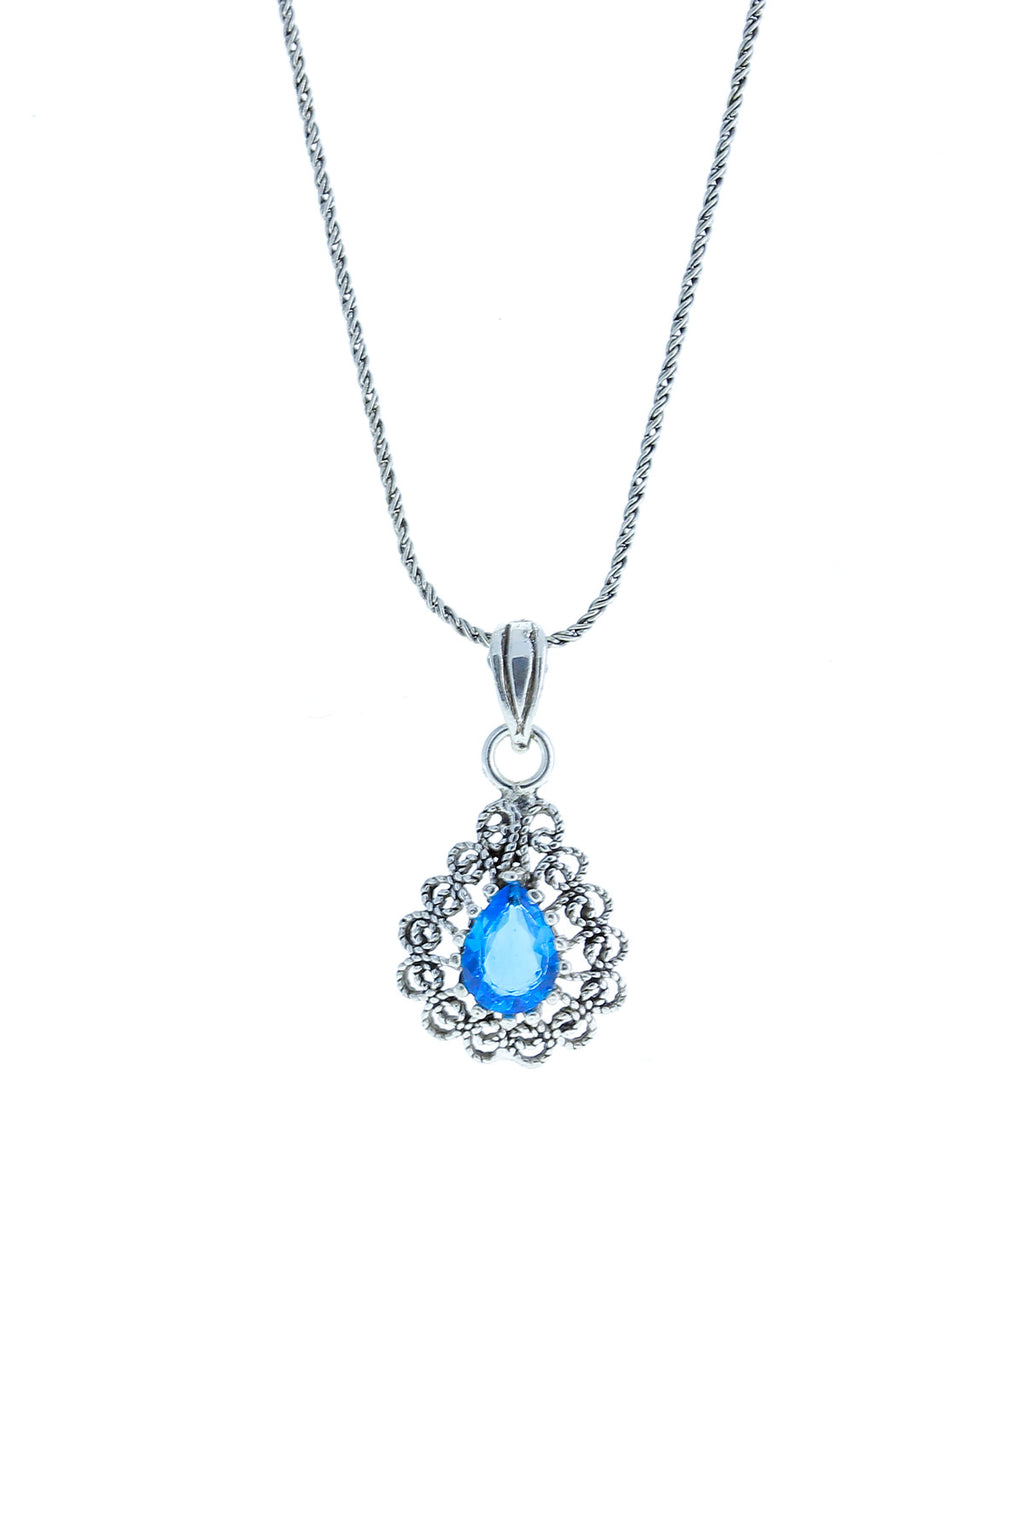 Drop Model Authentic Filigree Silver Necklace With Aquamarine (NG201017531)